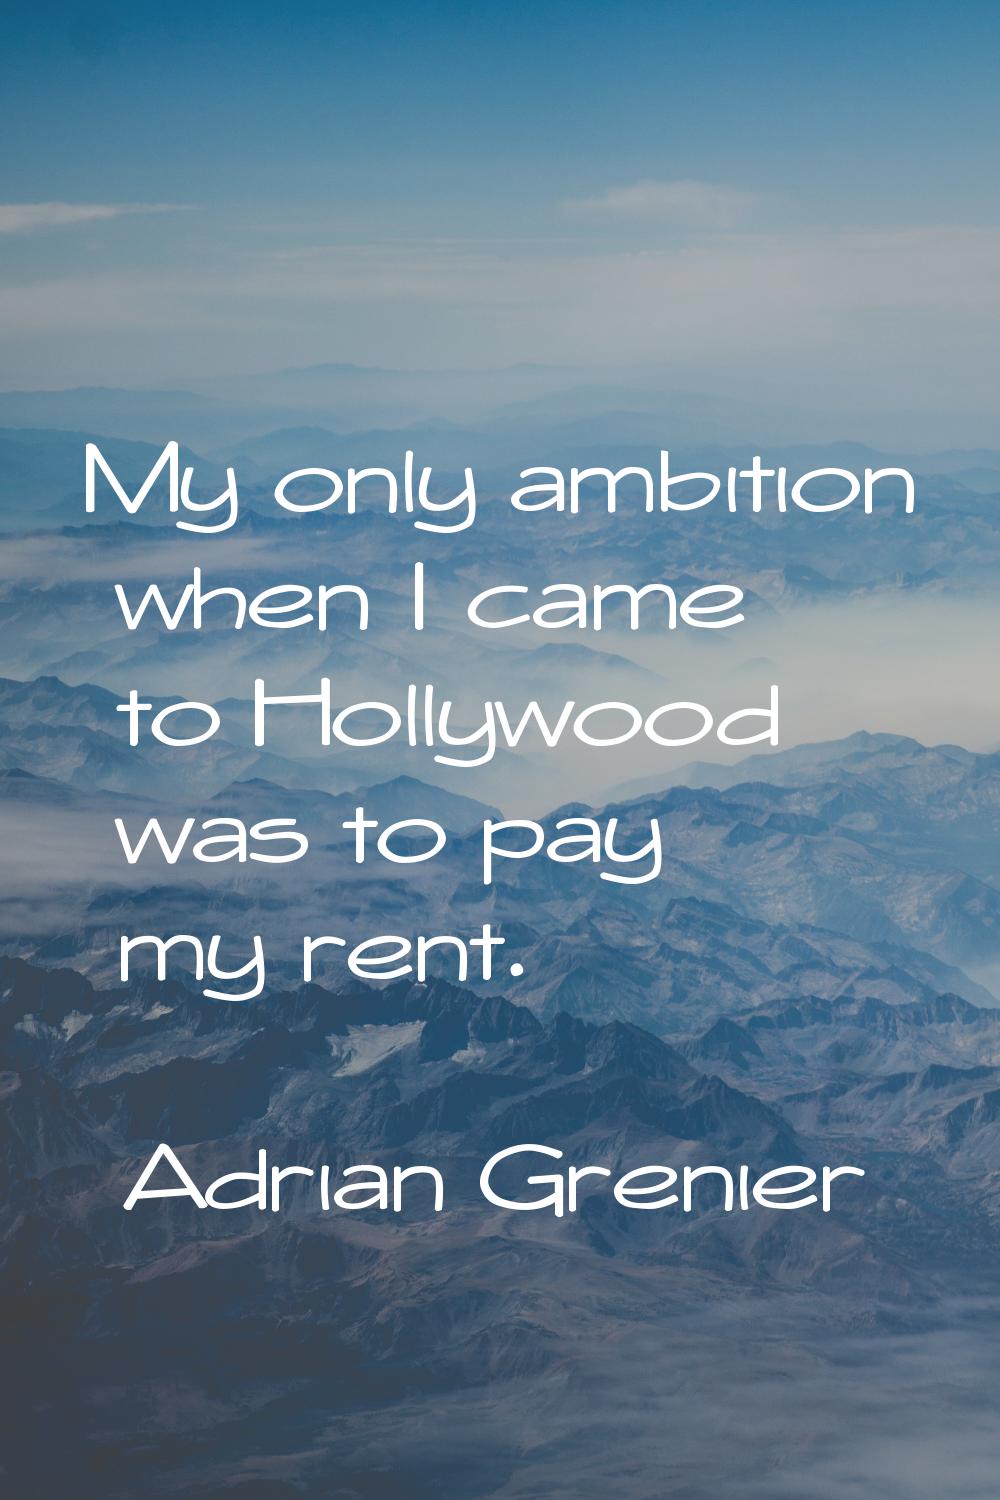 My only ambition when I came to Hollywood was to pay my rent.